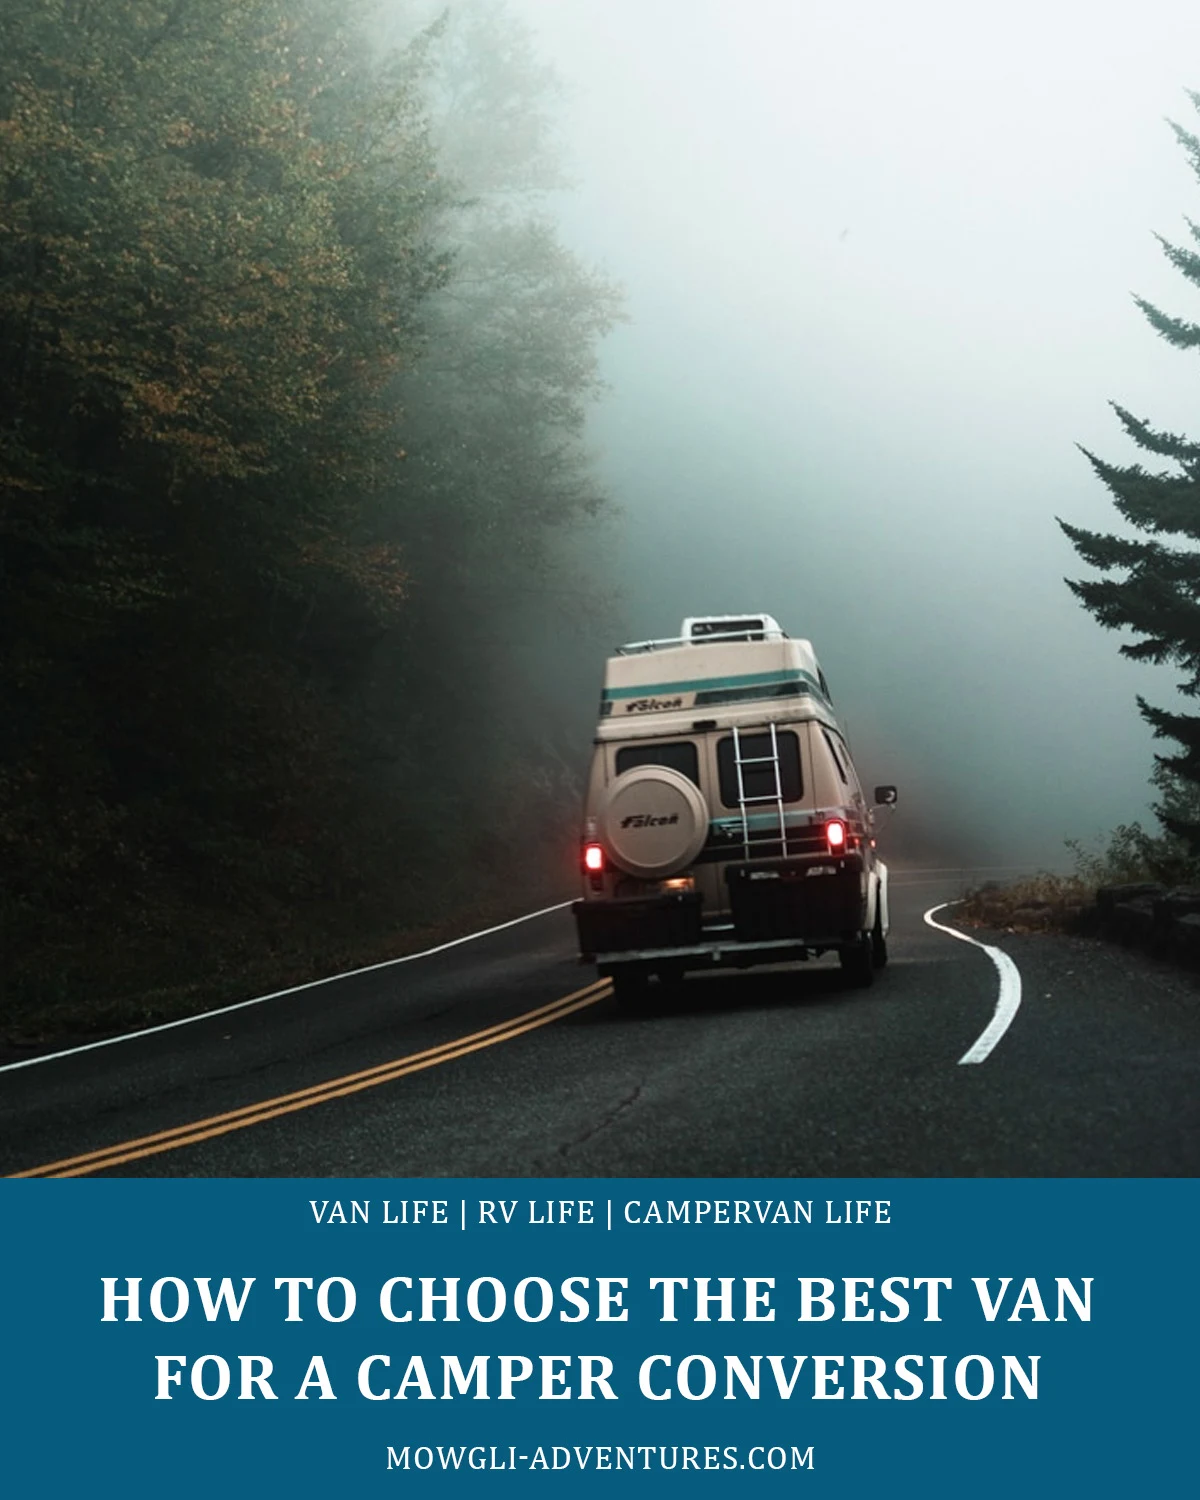 How to Choose the Best Van for a Camper van Conversion In All Style